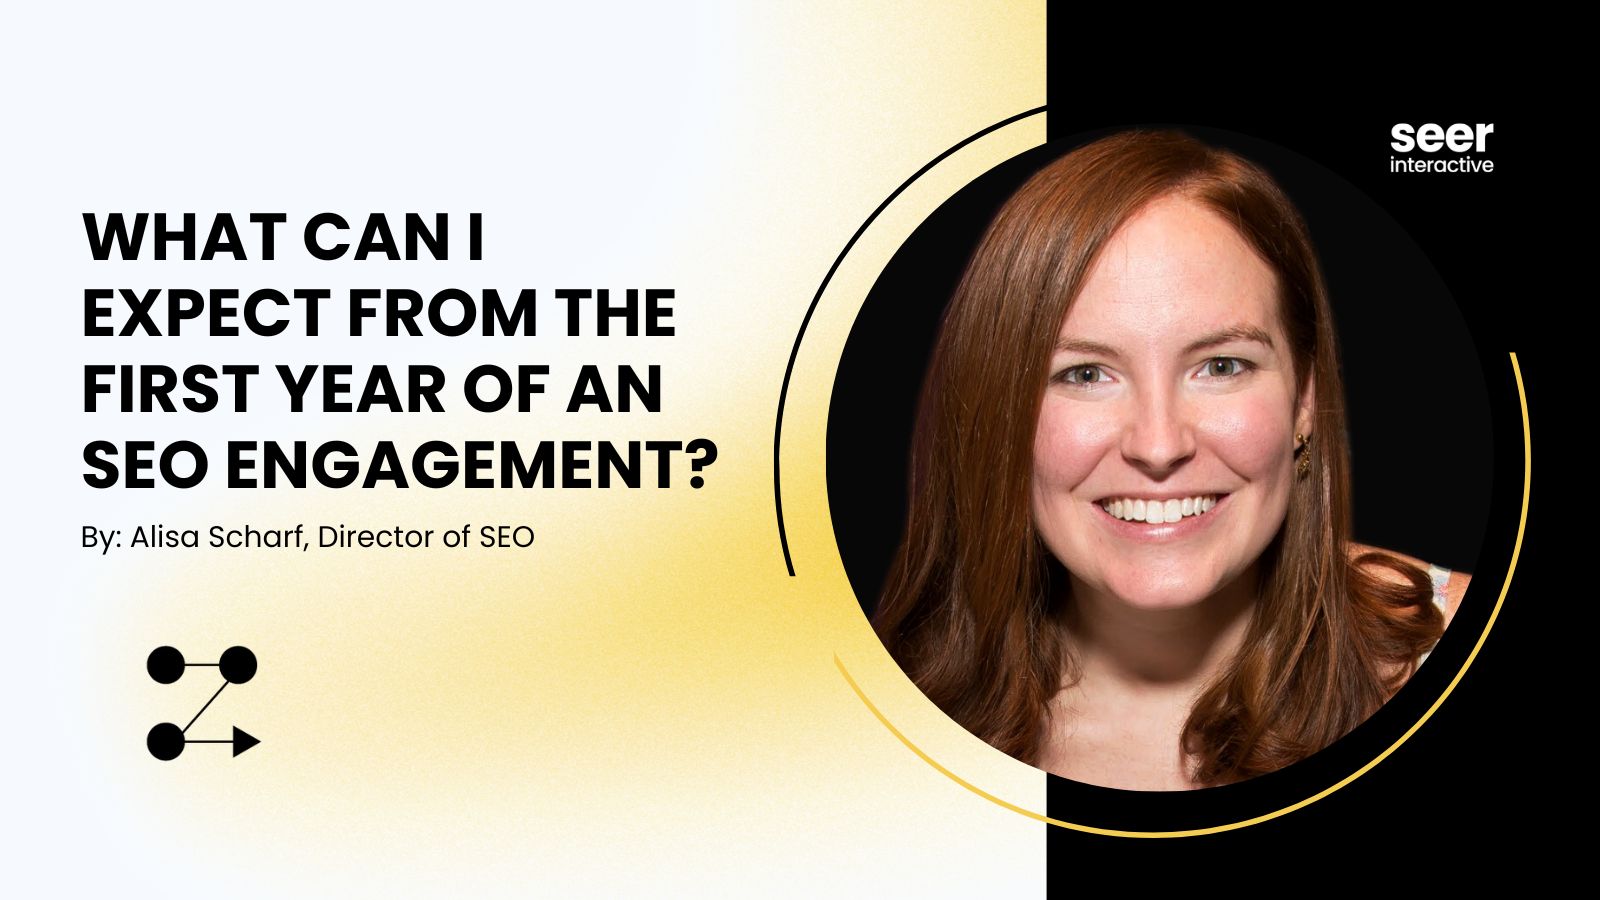 What can I expect from the first year of an SEO engagement?